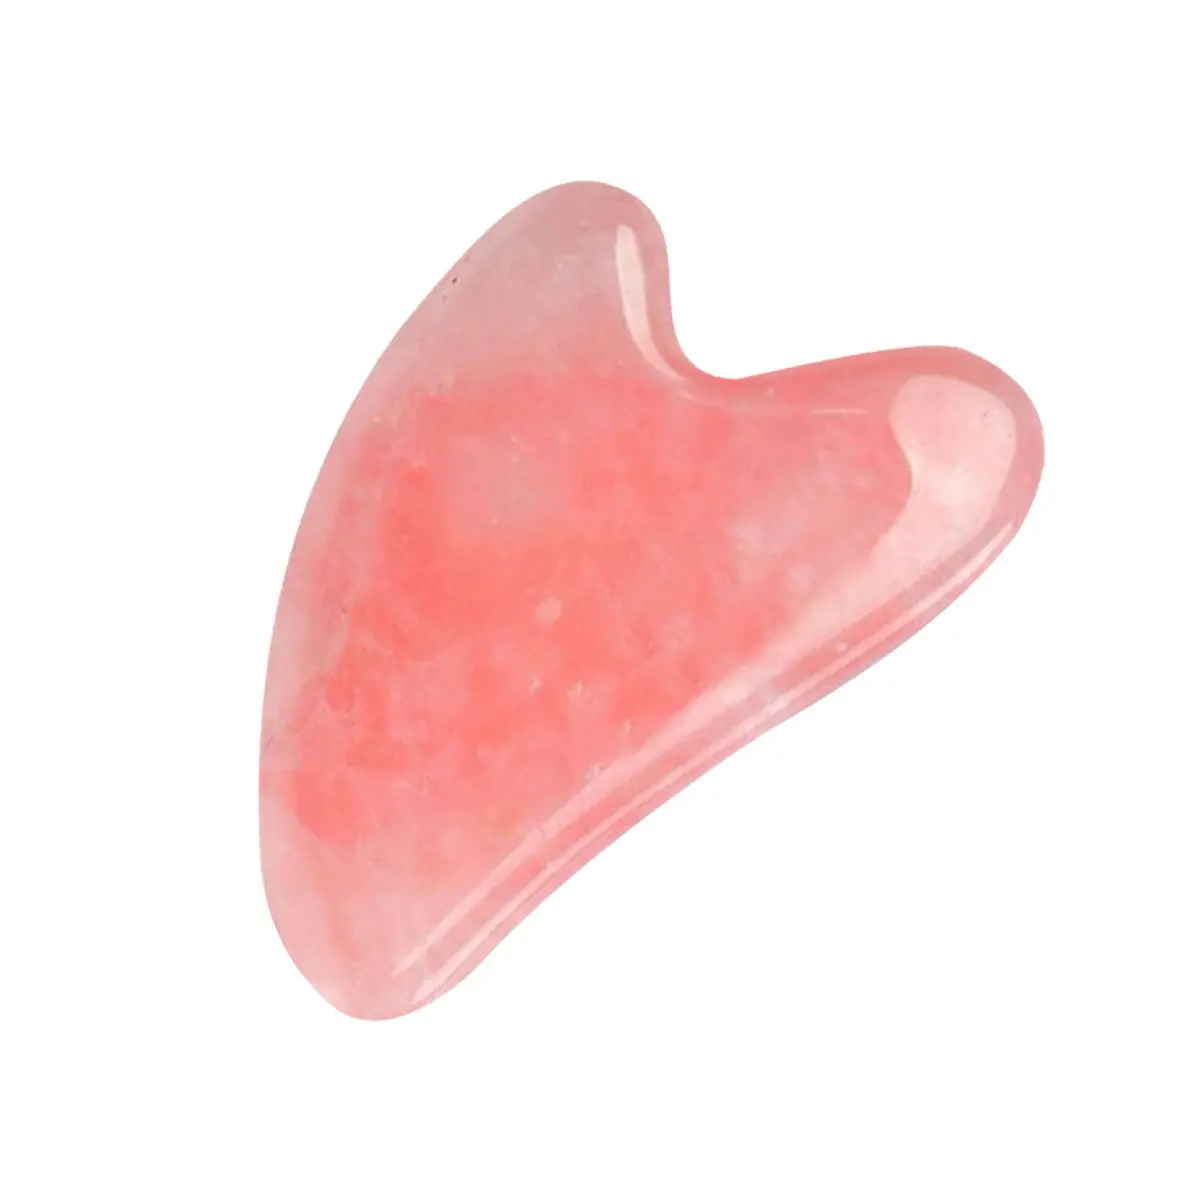 Love Earth Rose Quartz Gua Sha Face Shaping Tool With Rose Quartz Crystal For Lift & Firm Skin, Reduces Lines & Dark Circles